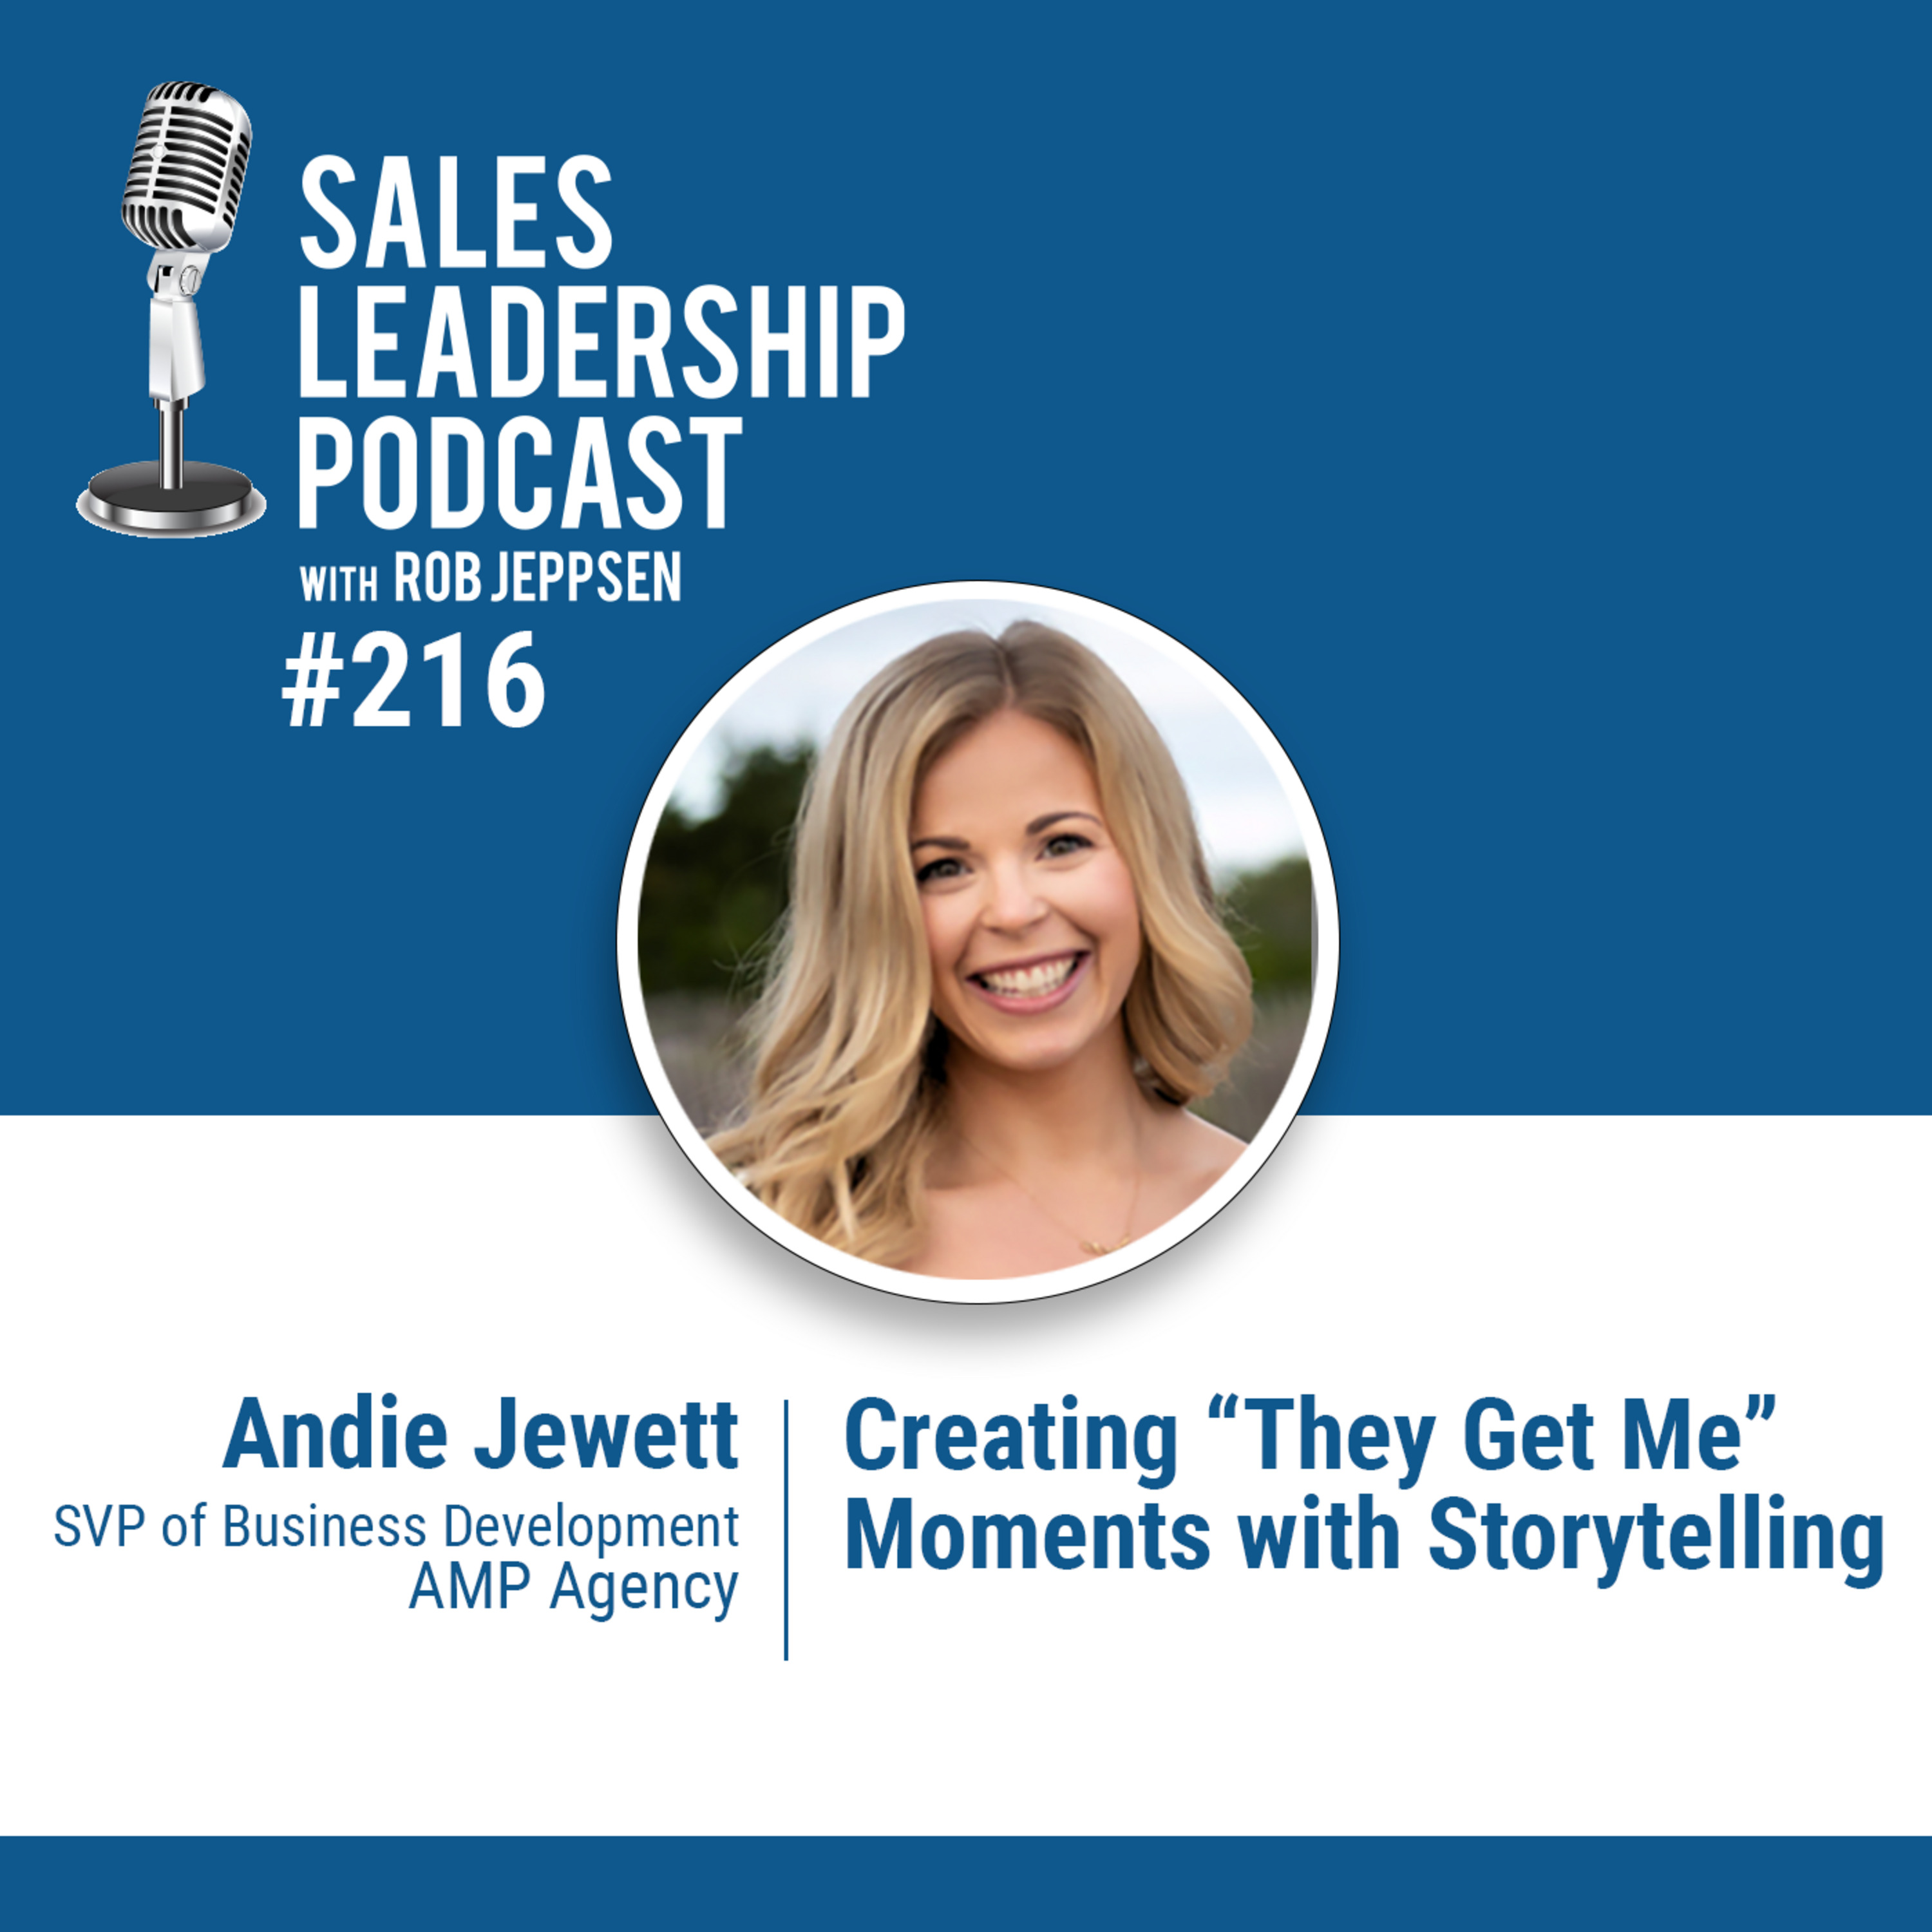 Episode 217: #216: Andie Jewett of AMP Agency  —  Creating “They Get Me” Moments with Storytelling